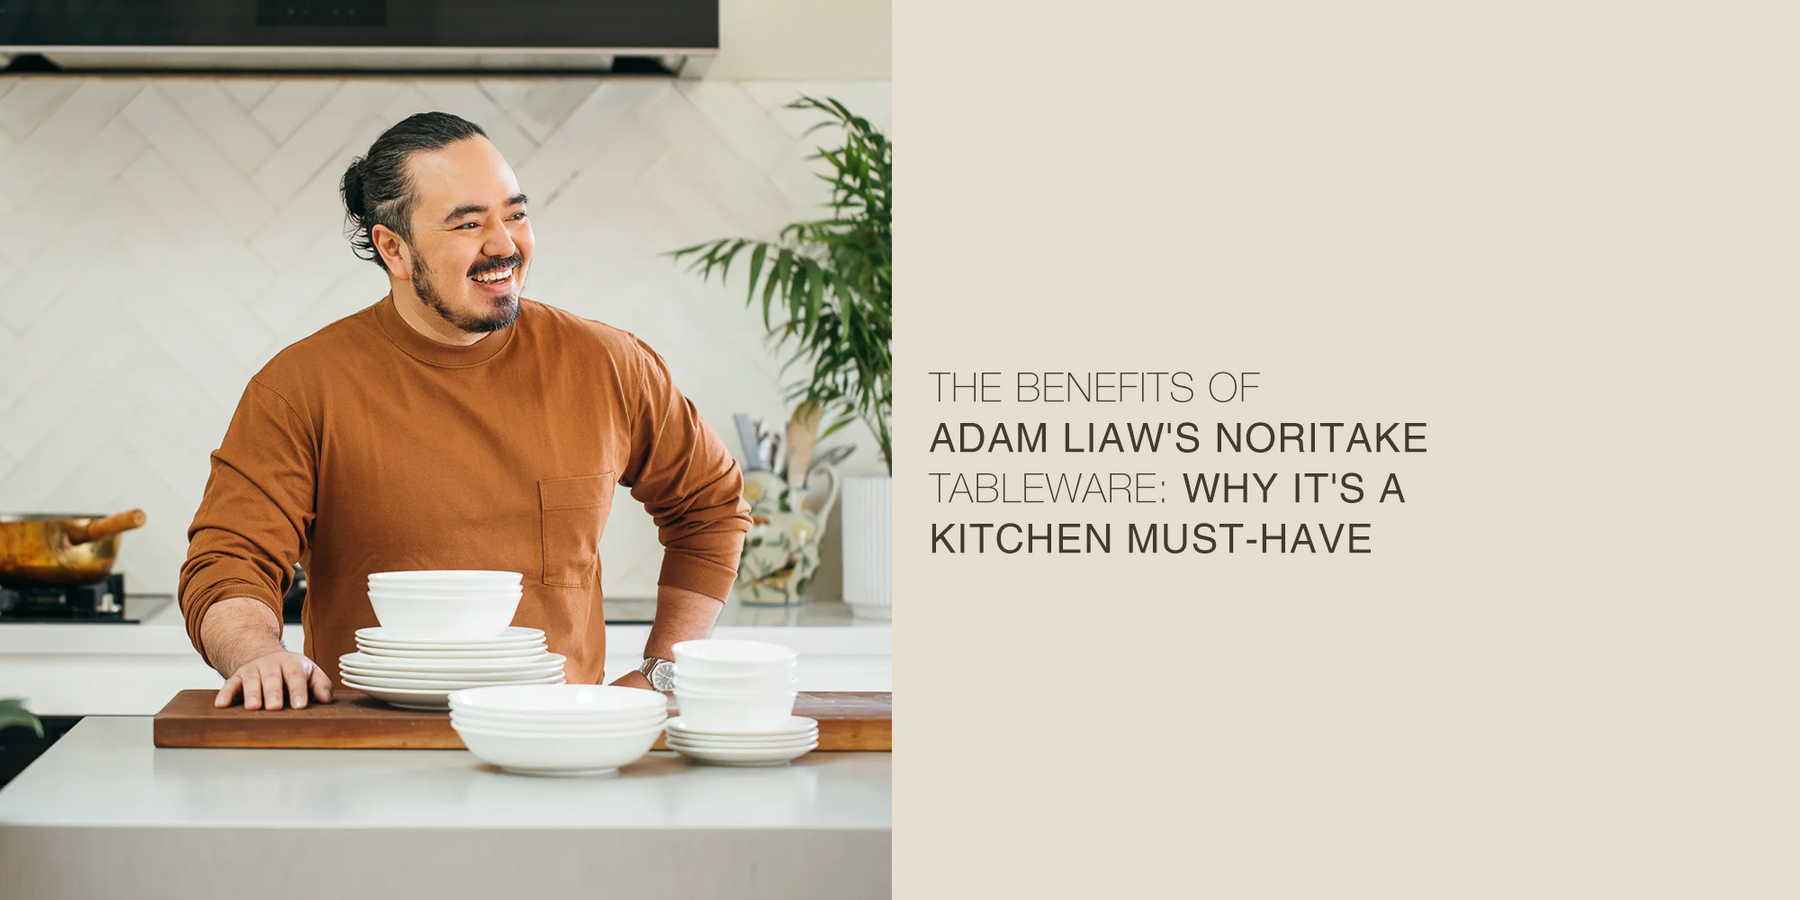 The Benefits of Adam Liaw's Noritake Tableware: Why It's a Kitchen Must-Have